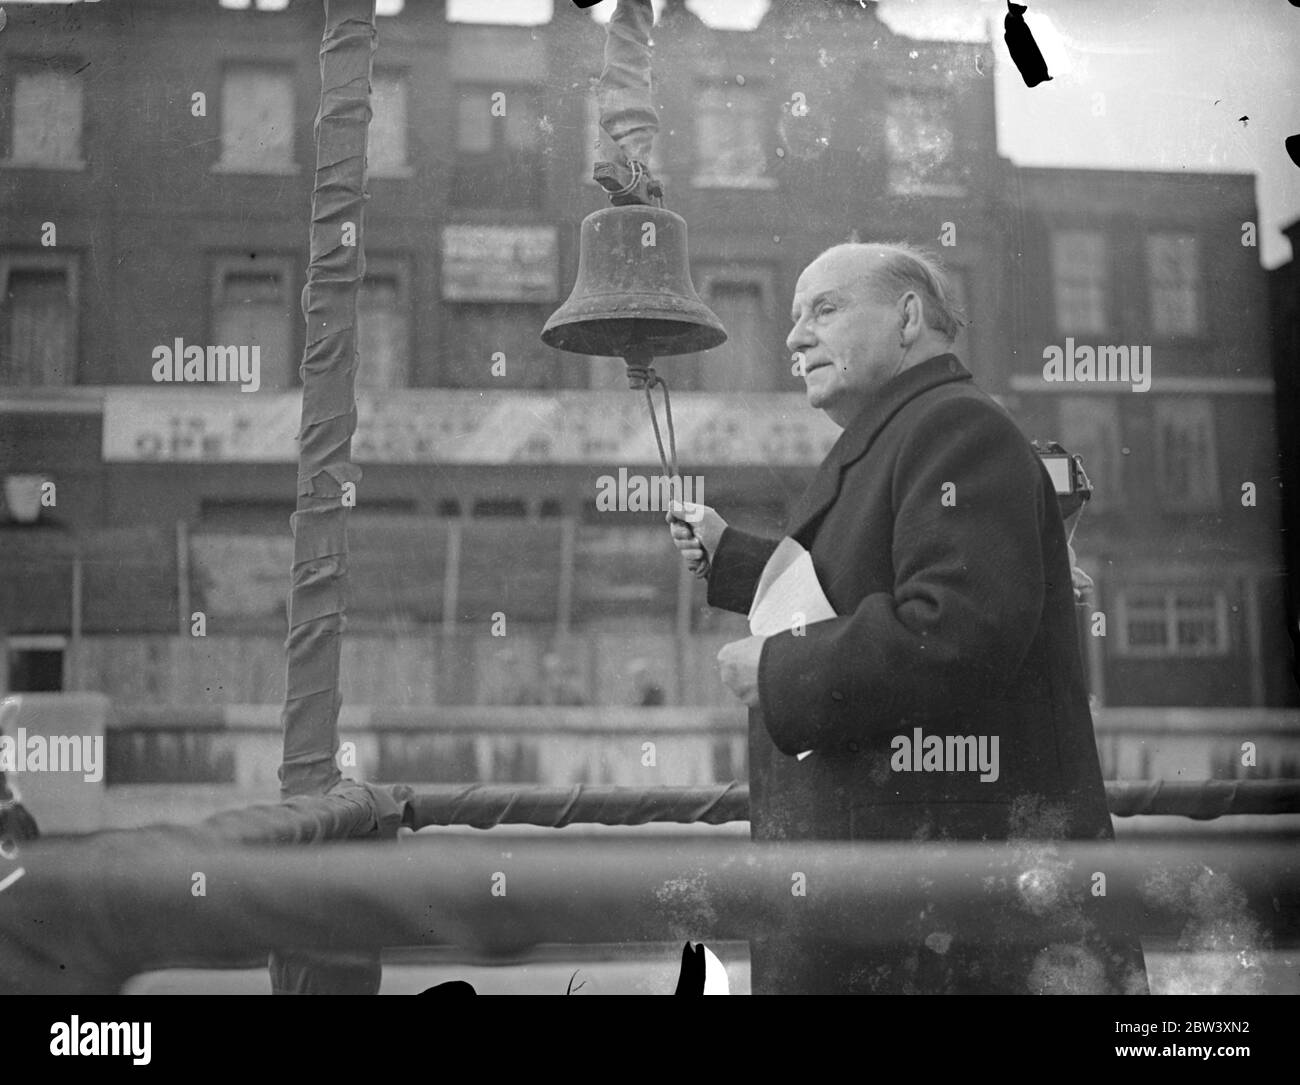 Lord Wakefield inaugurates Tower Hill demolition work . Lord Wakefield presided at the inauguration of demolition work on Tower Hill under the Tower Hill Improvement Scheme . Lord Wakefield rang a bell as a signal for the ' blowing up ' of the old buildings . Photo shows , Lord Wakefield ringing the bell . 18 March 1937 Stock Photo